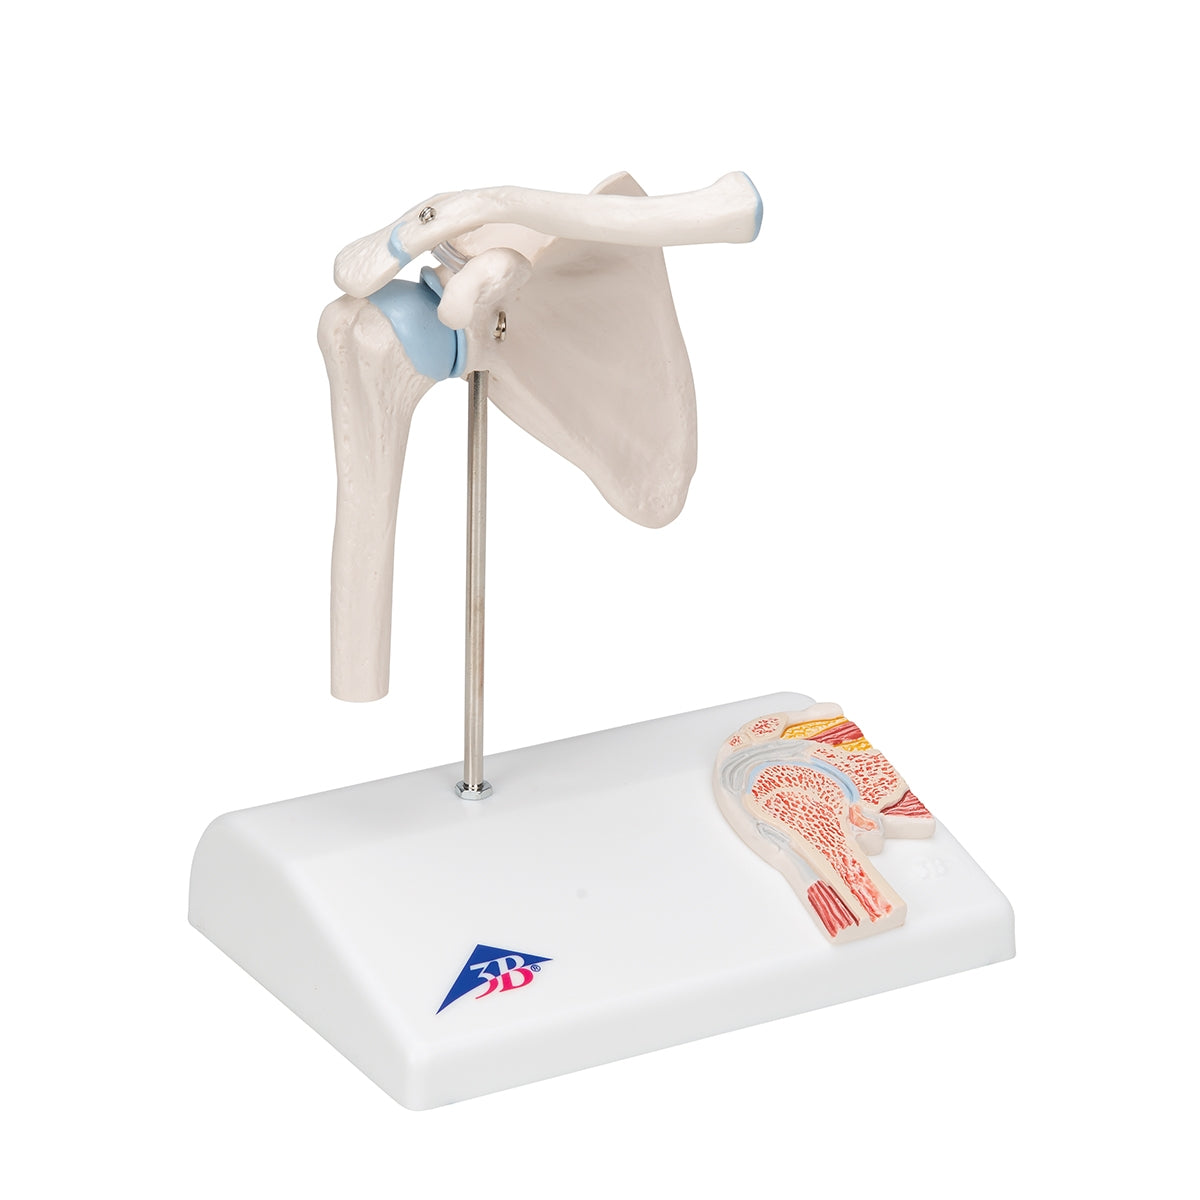 Mini Human Shoulder Joint Model with Coss Section